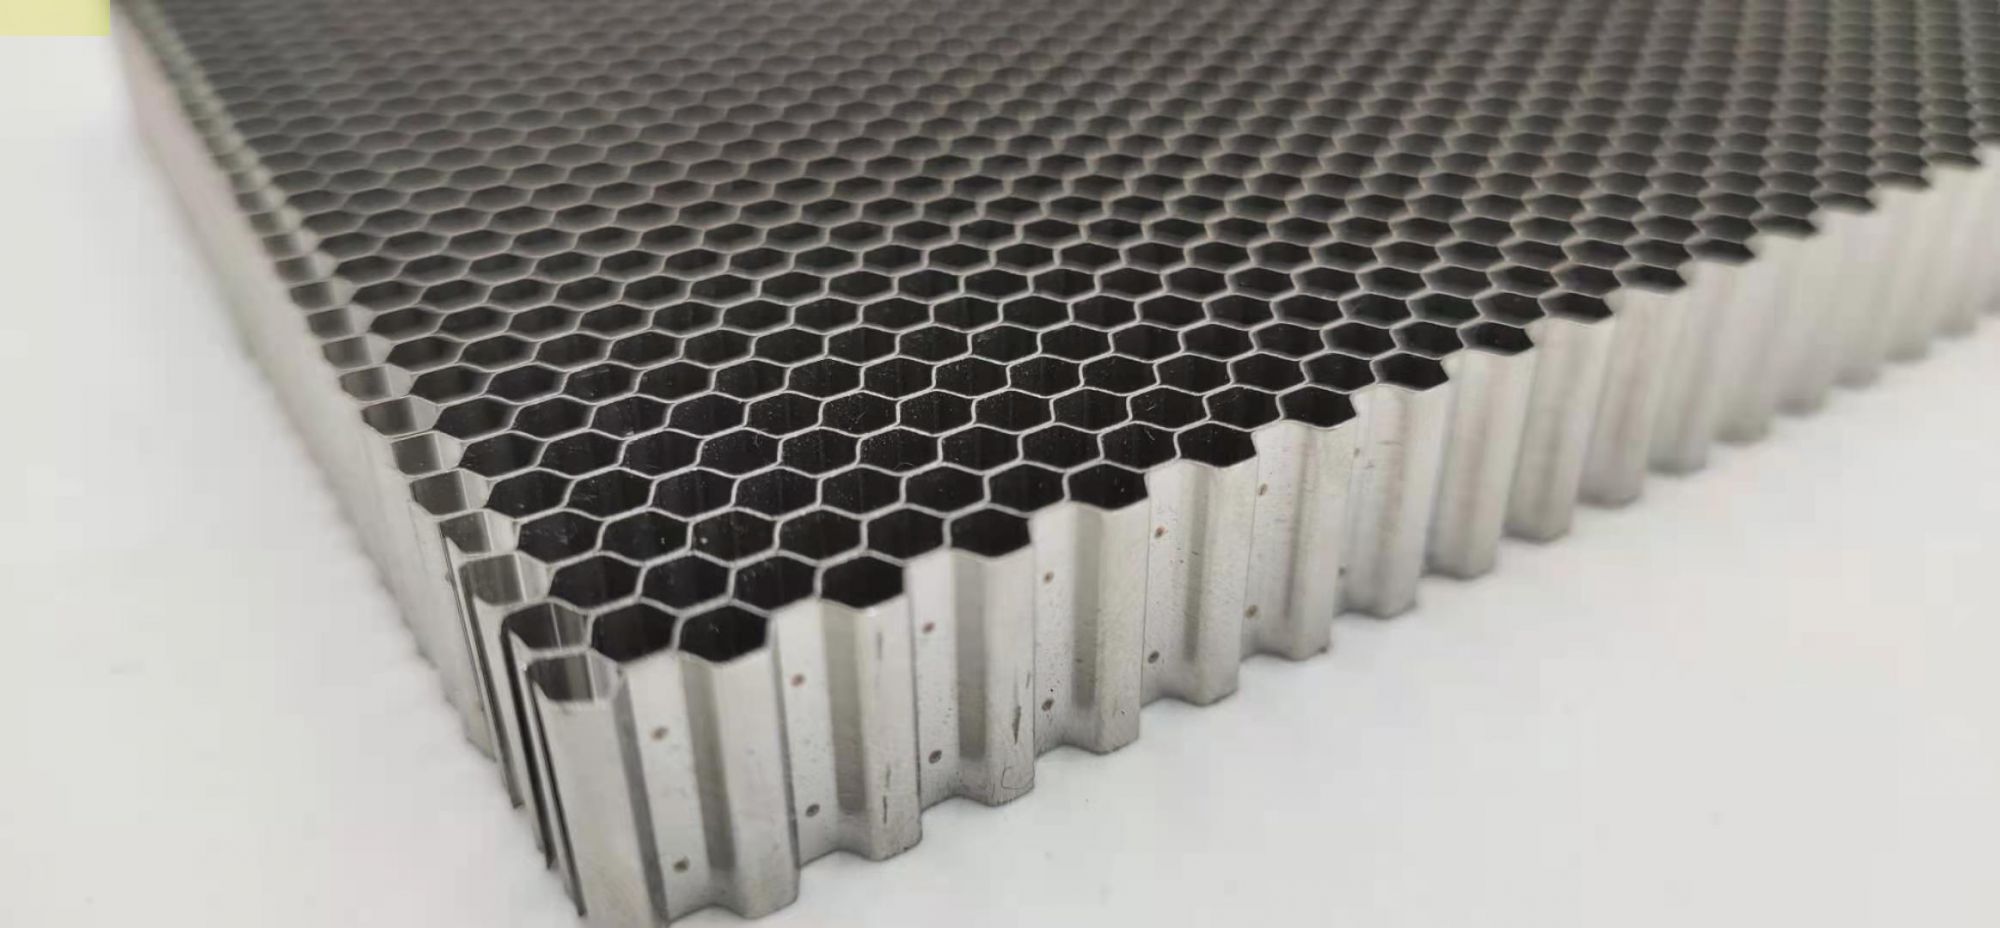 Spot Welding 304 Stainless Steel Honeycomb Core With High Corrosion Resistance